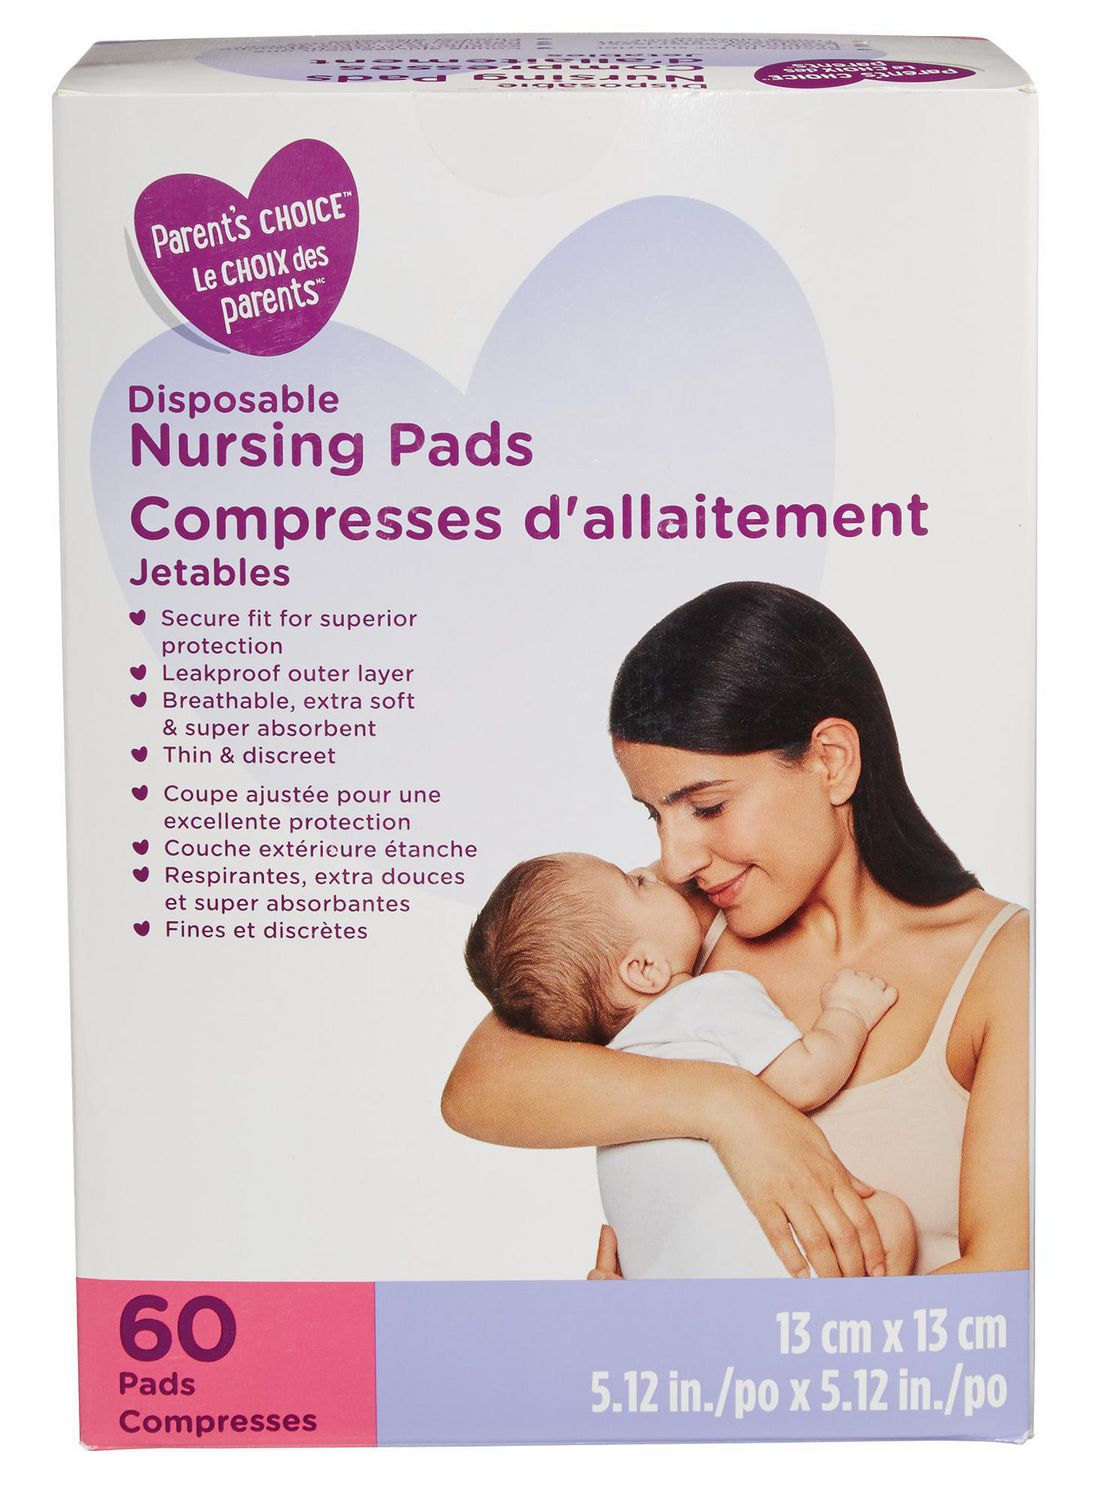 7 Best Disposable and Reusable Breast Pads for Nursing Moms in India of 2021